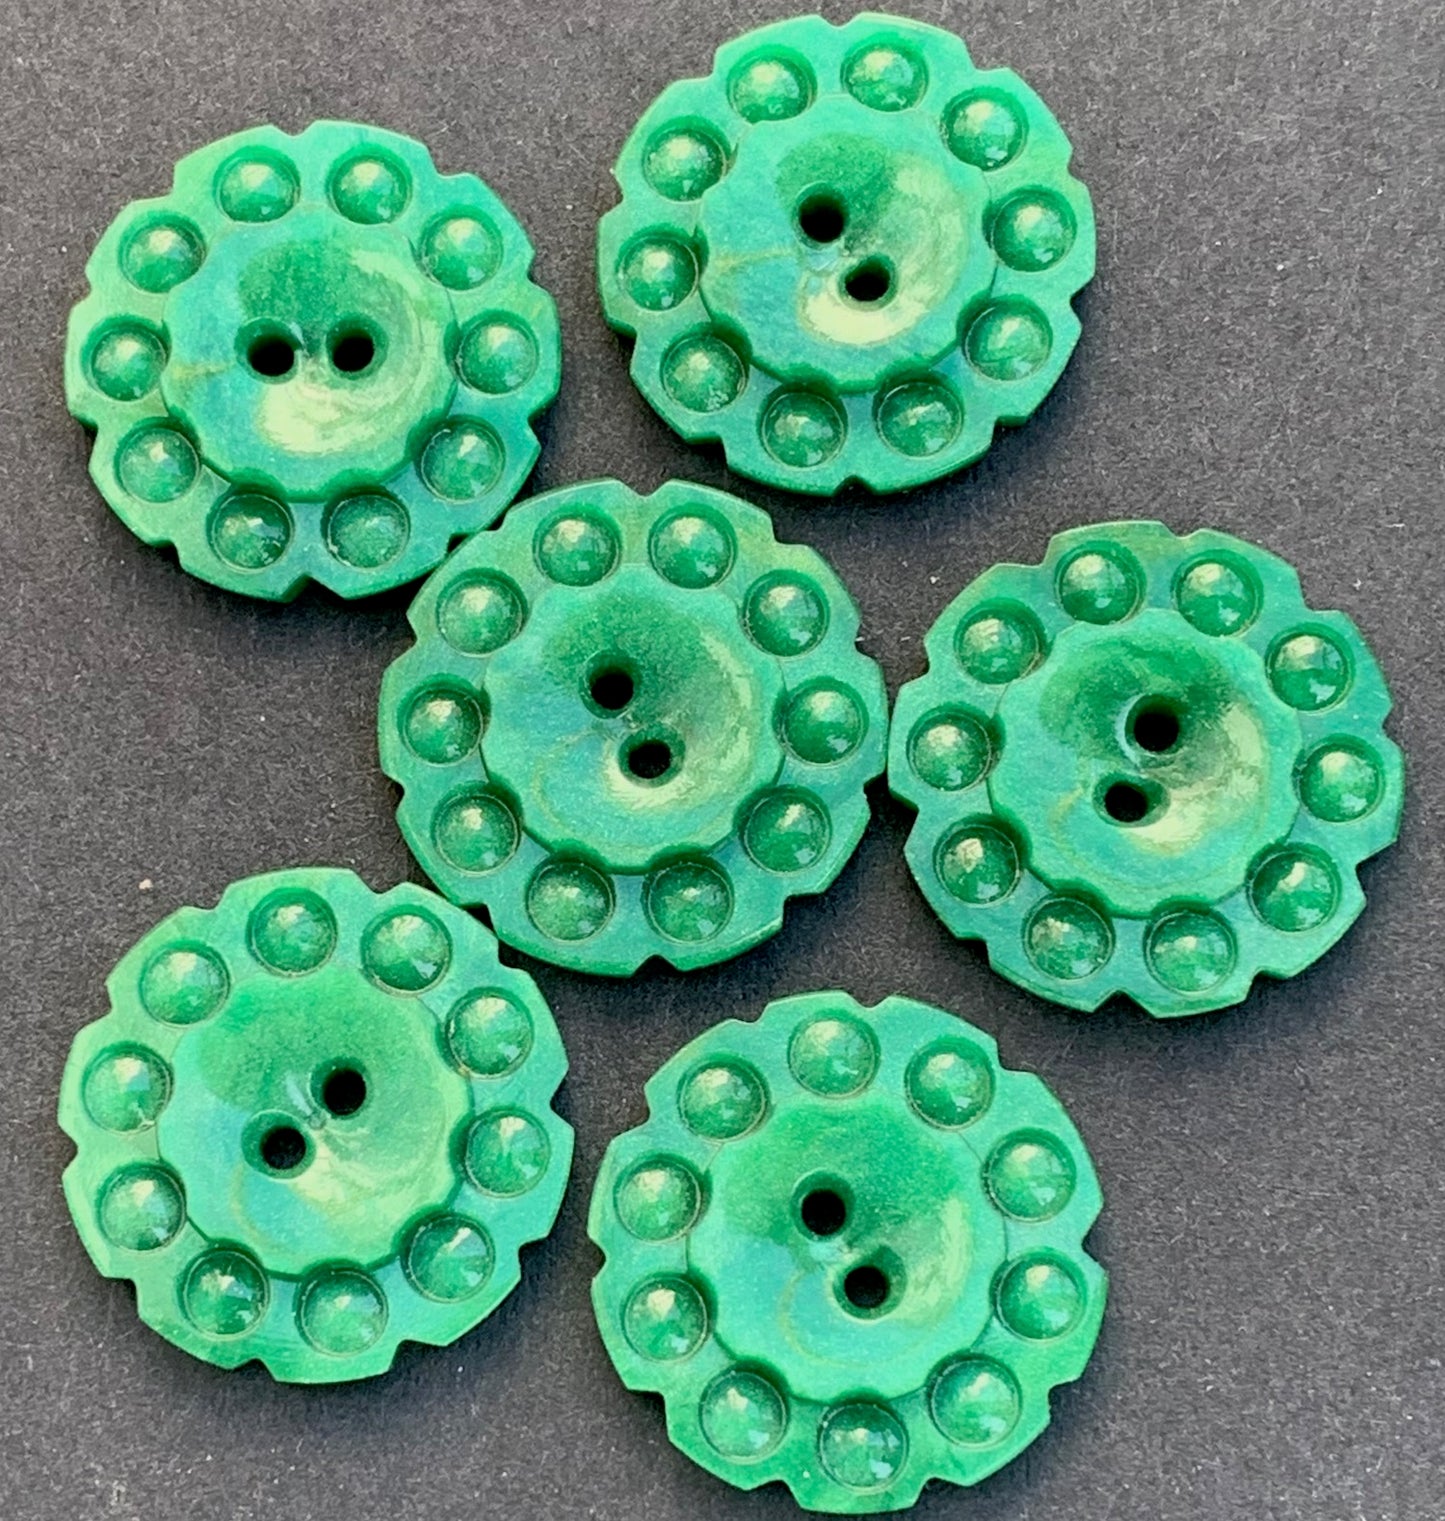 1.7cm or 2.2cm Jade Green Vintage Buttons - 6 of them